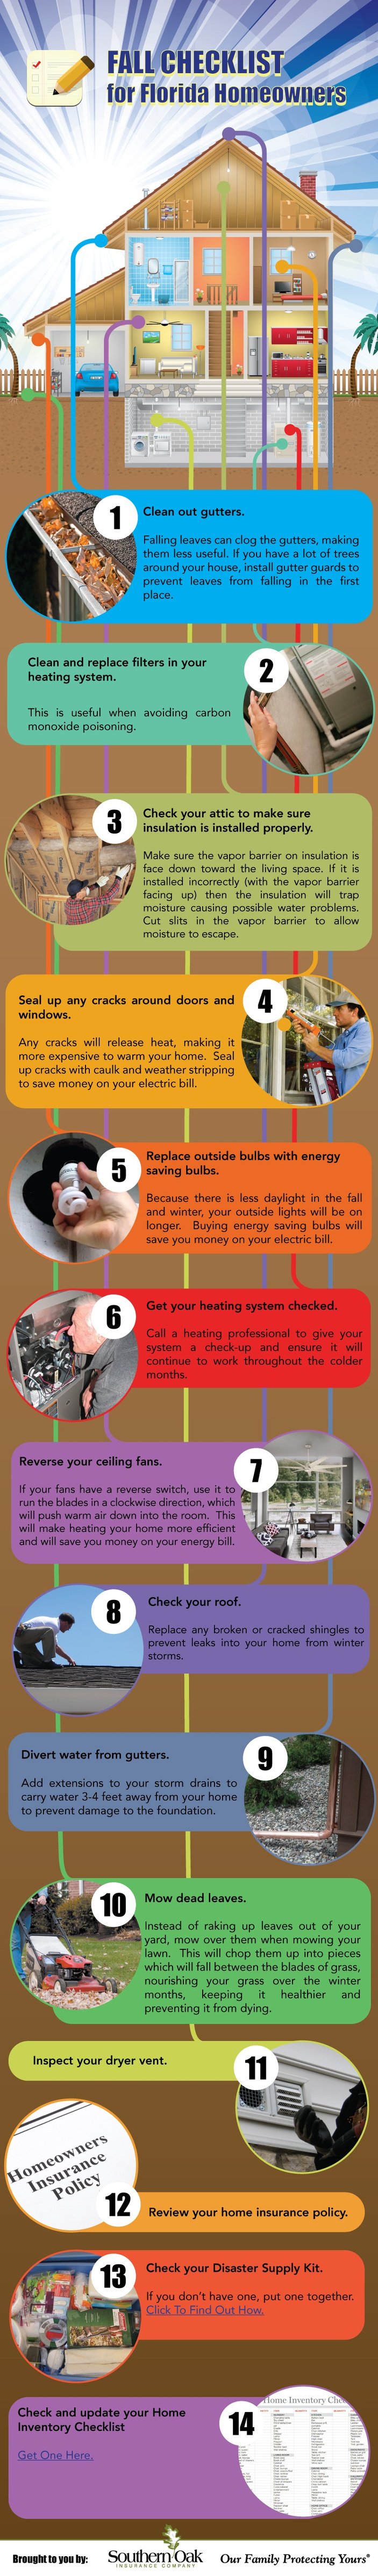 Fall Checklist for Florida Homeowners